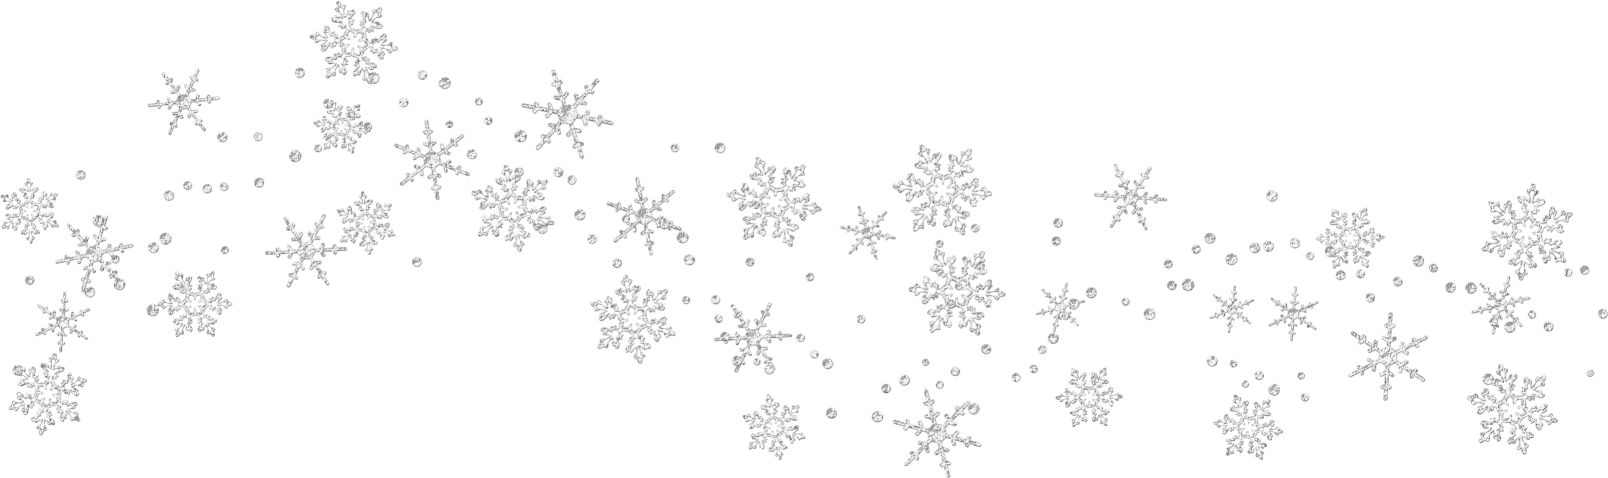 snowflake clipart without background - photo #30